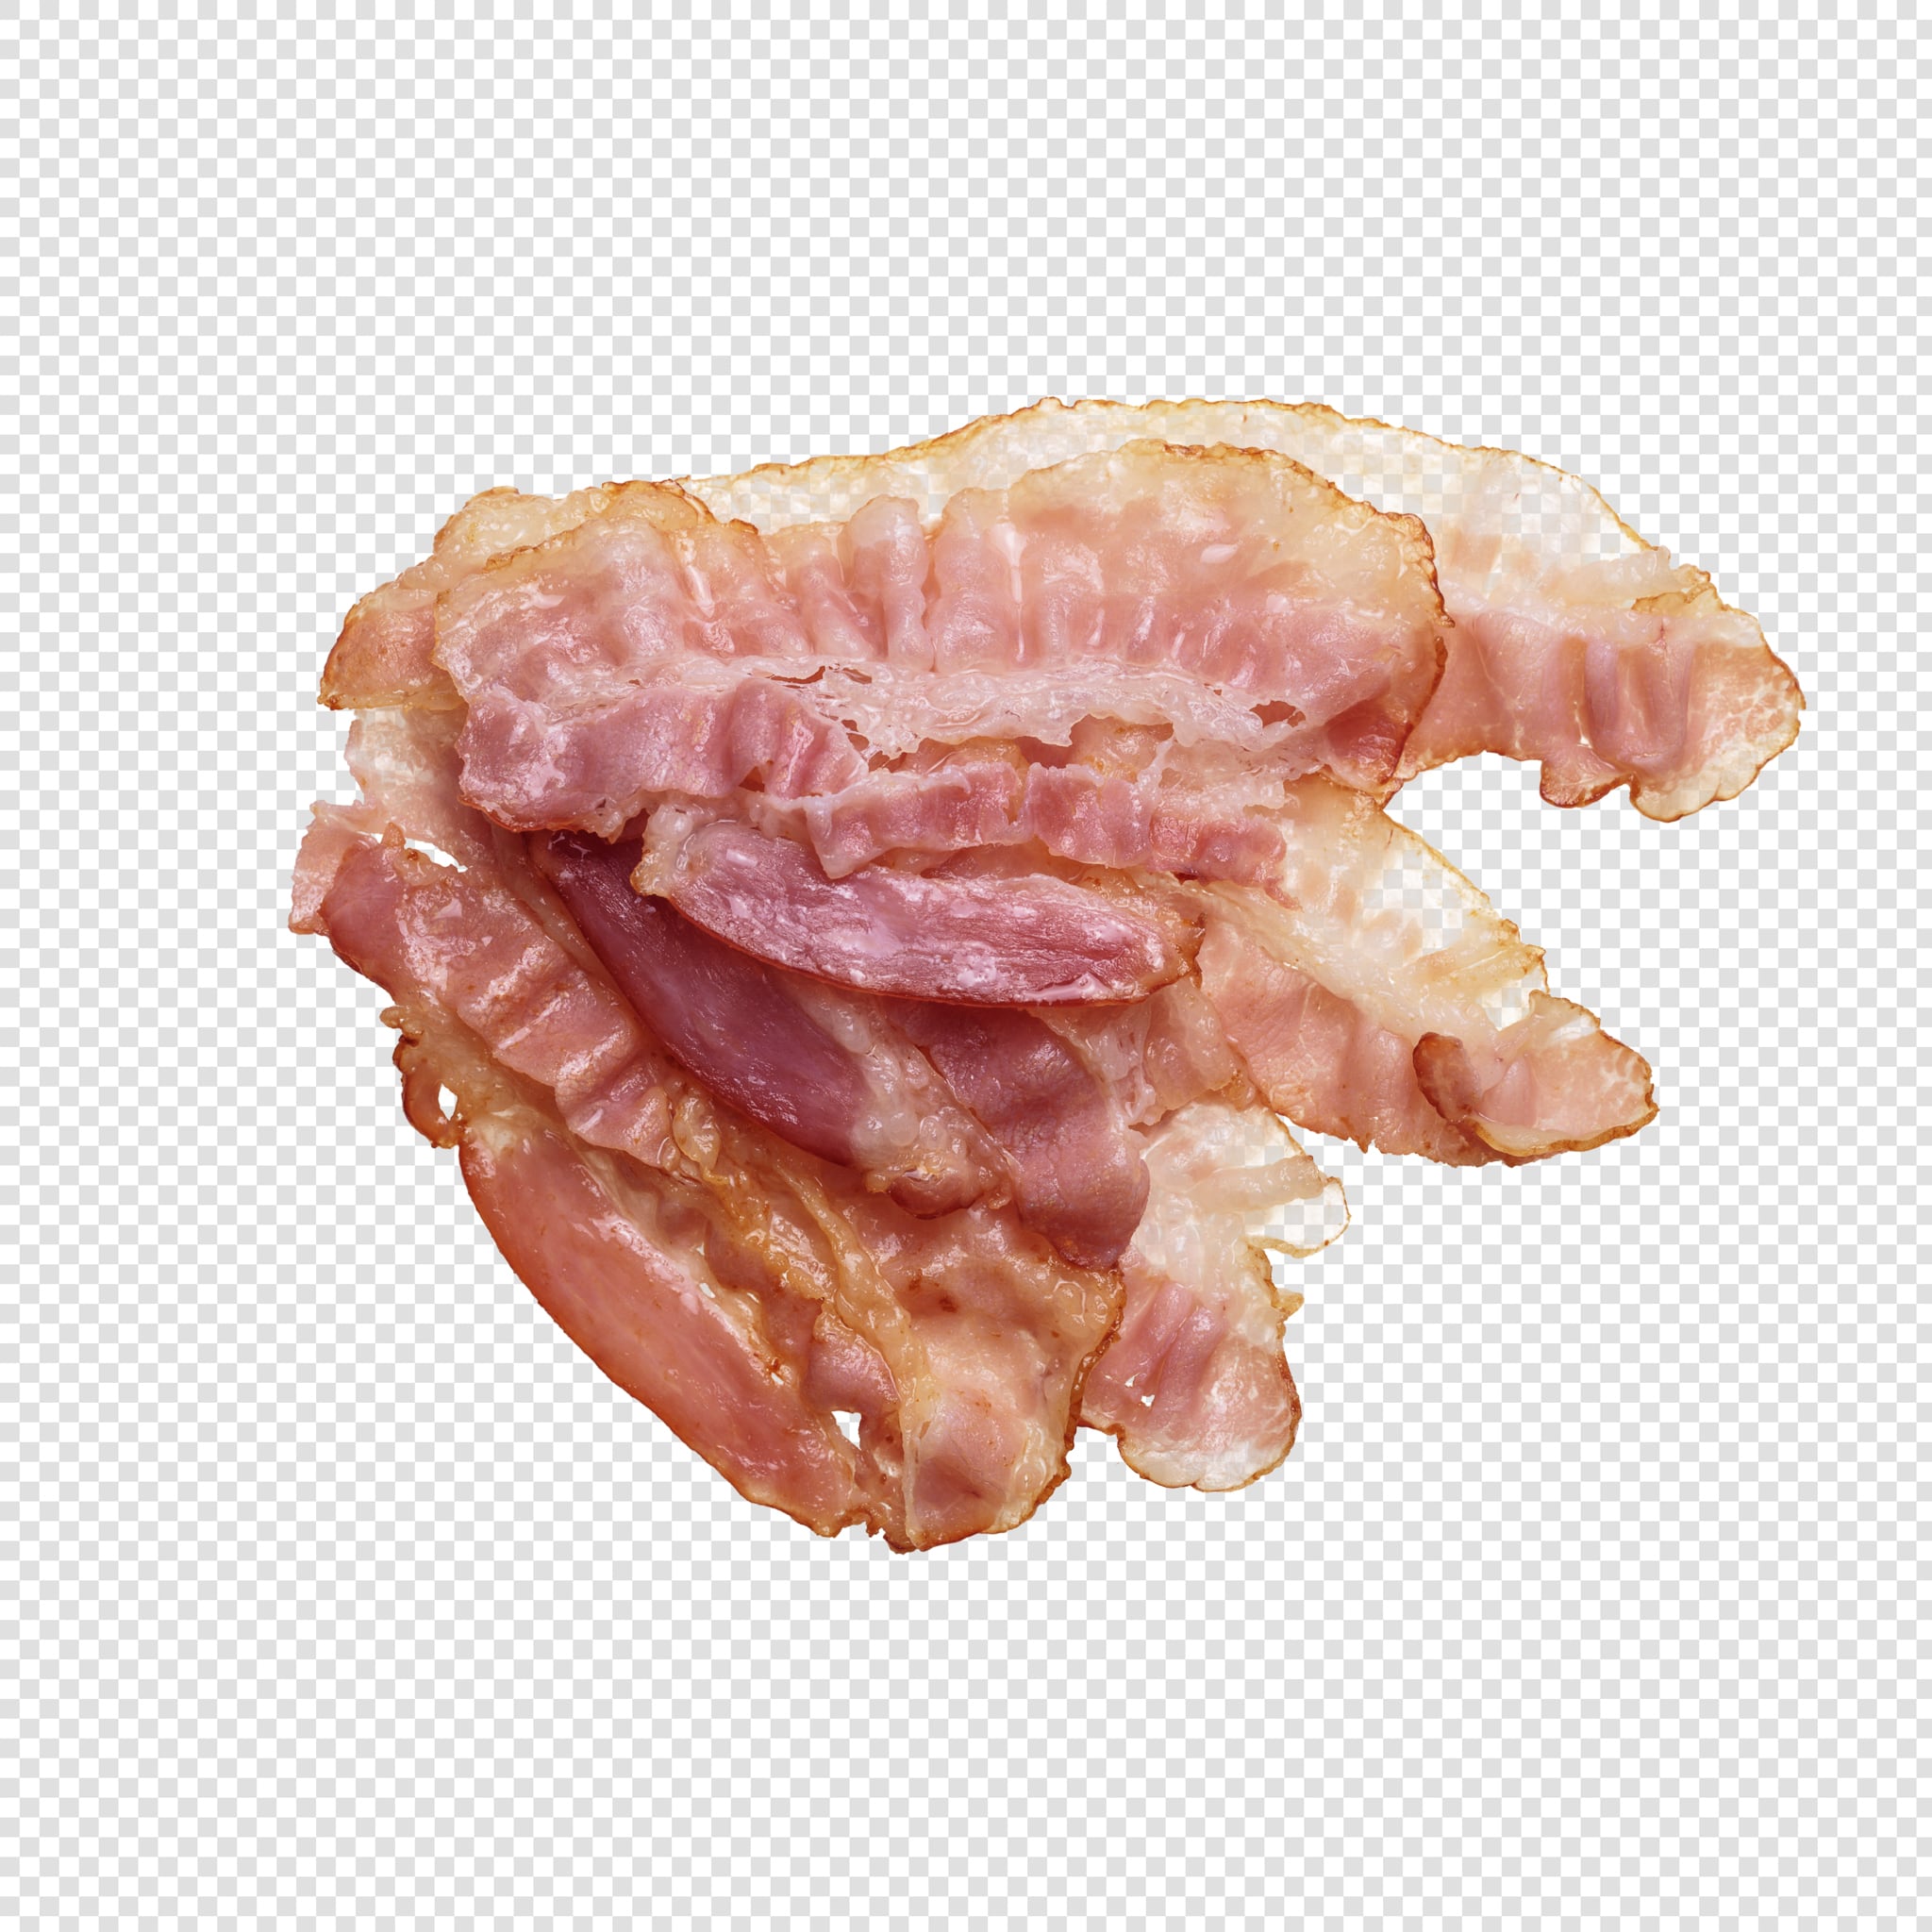 Bacon image asset with transparent background